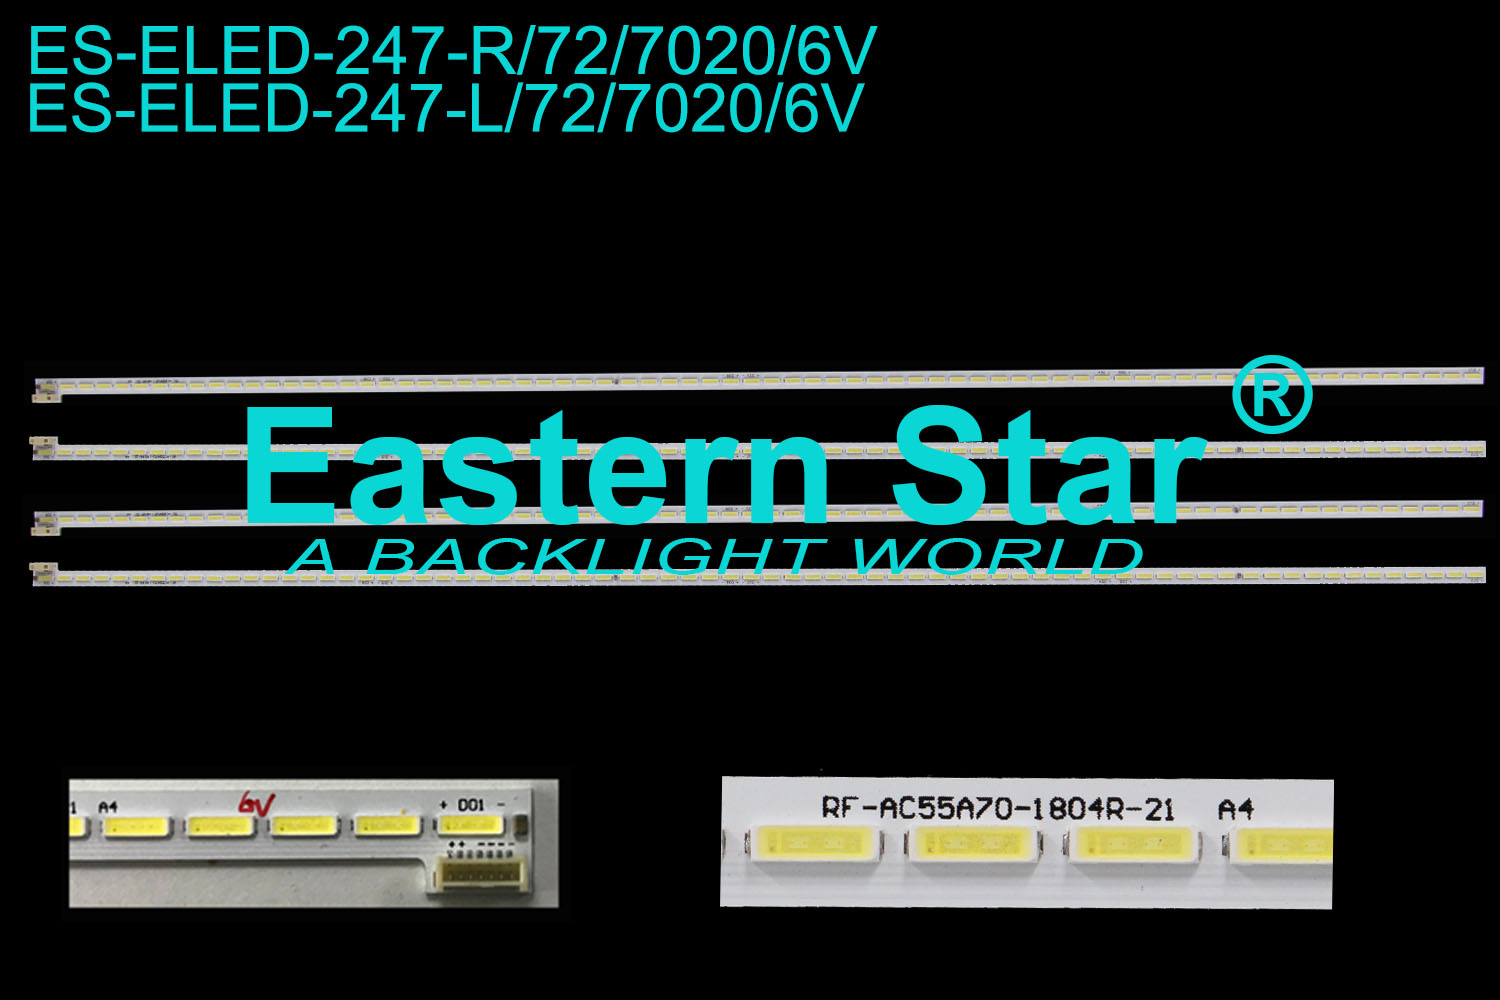 ES-ELED-247 ELED/EDGE TV backlight 55'' 72LEDs use for CHANGHONG RF-AC550A70-1804R/1804L-21 A4 LED STRIPS(2)